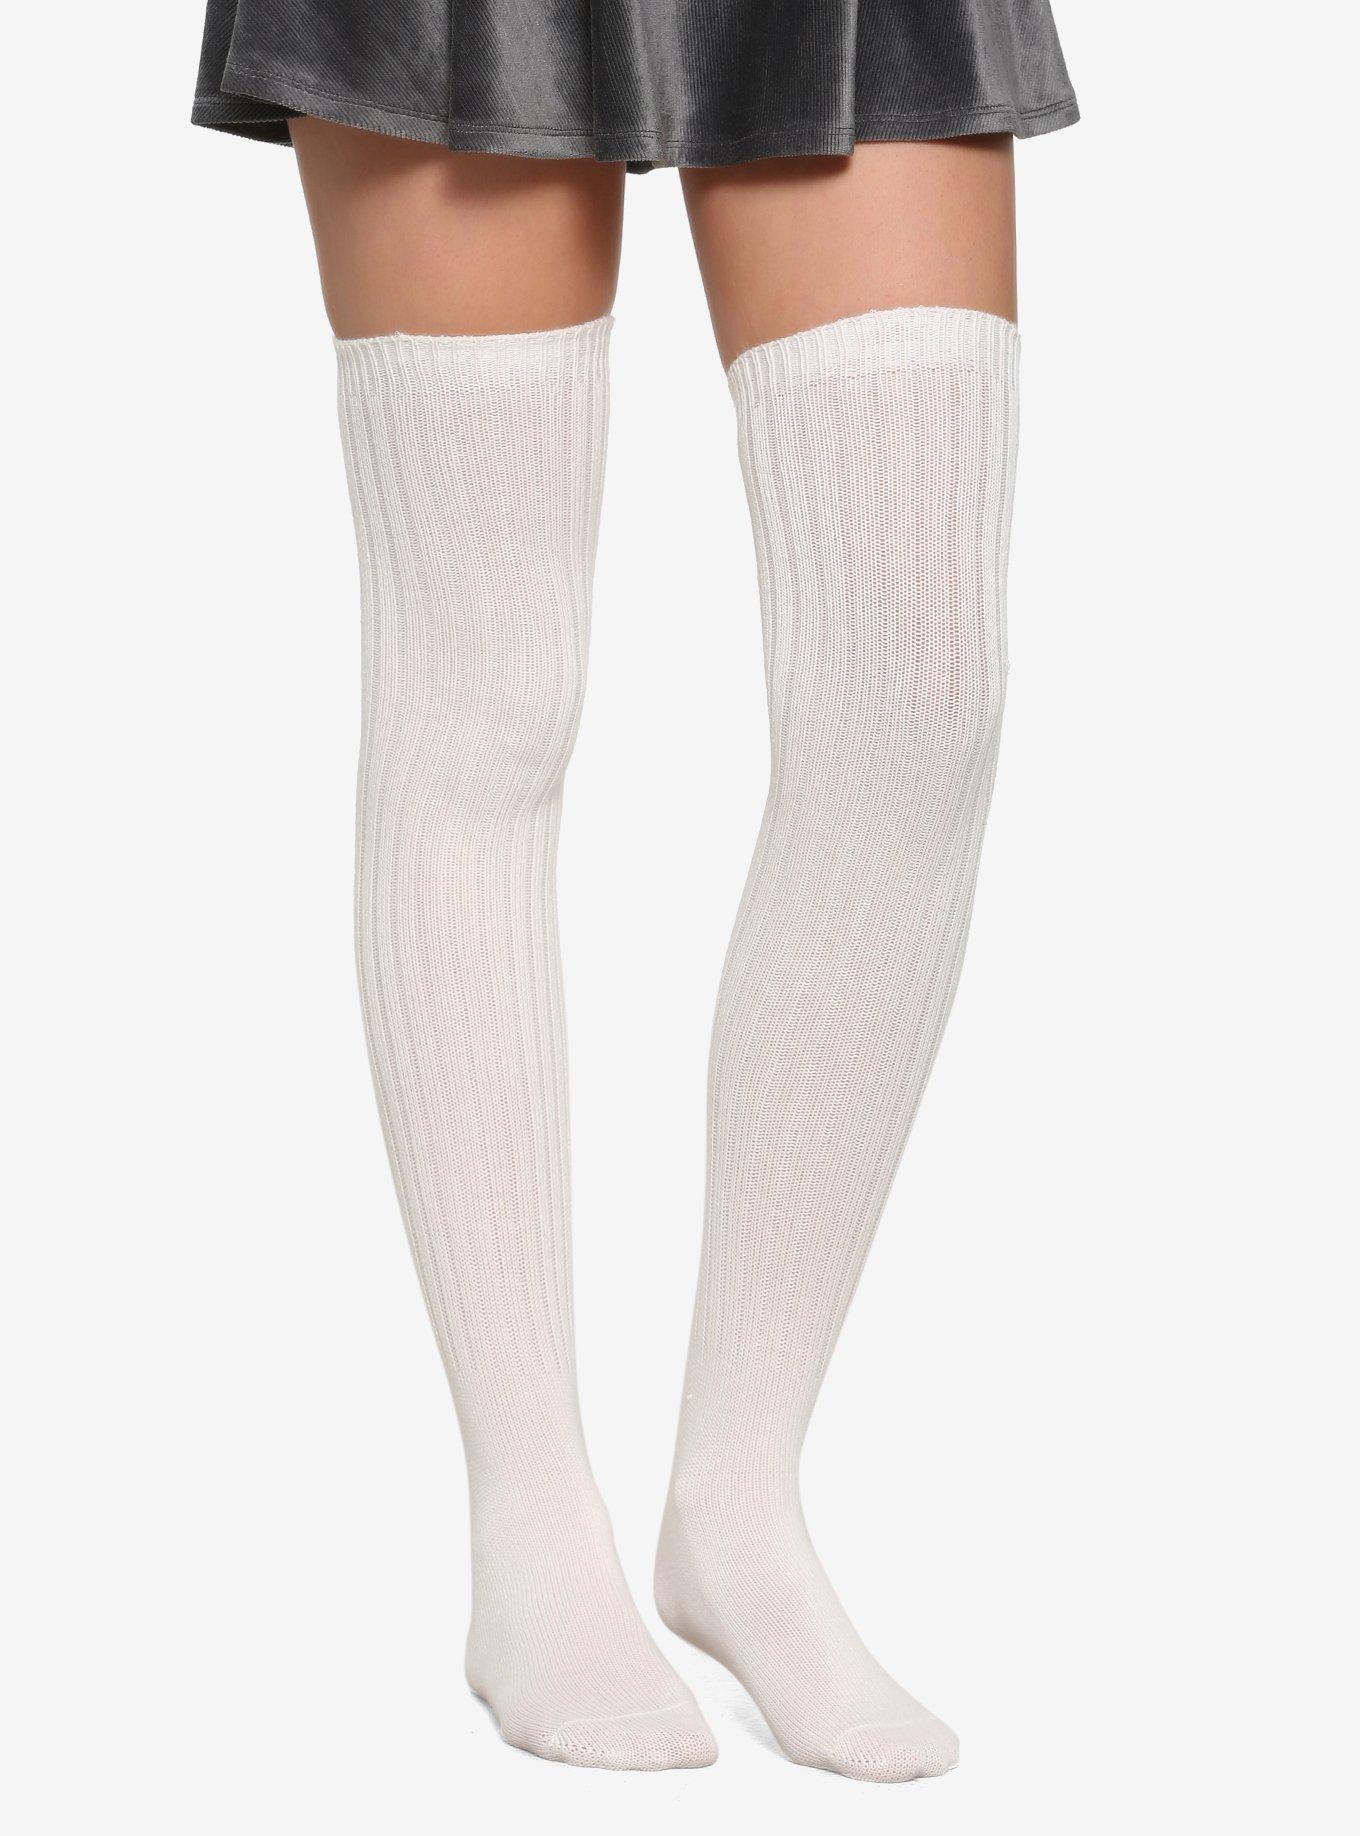 Hot Topic BNWOT Hot Topic White Pink Banded Winged Knee High Socks 